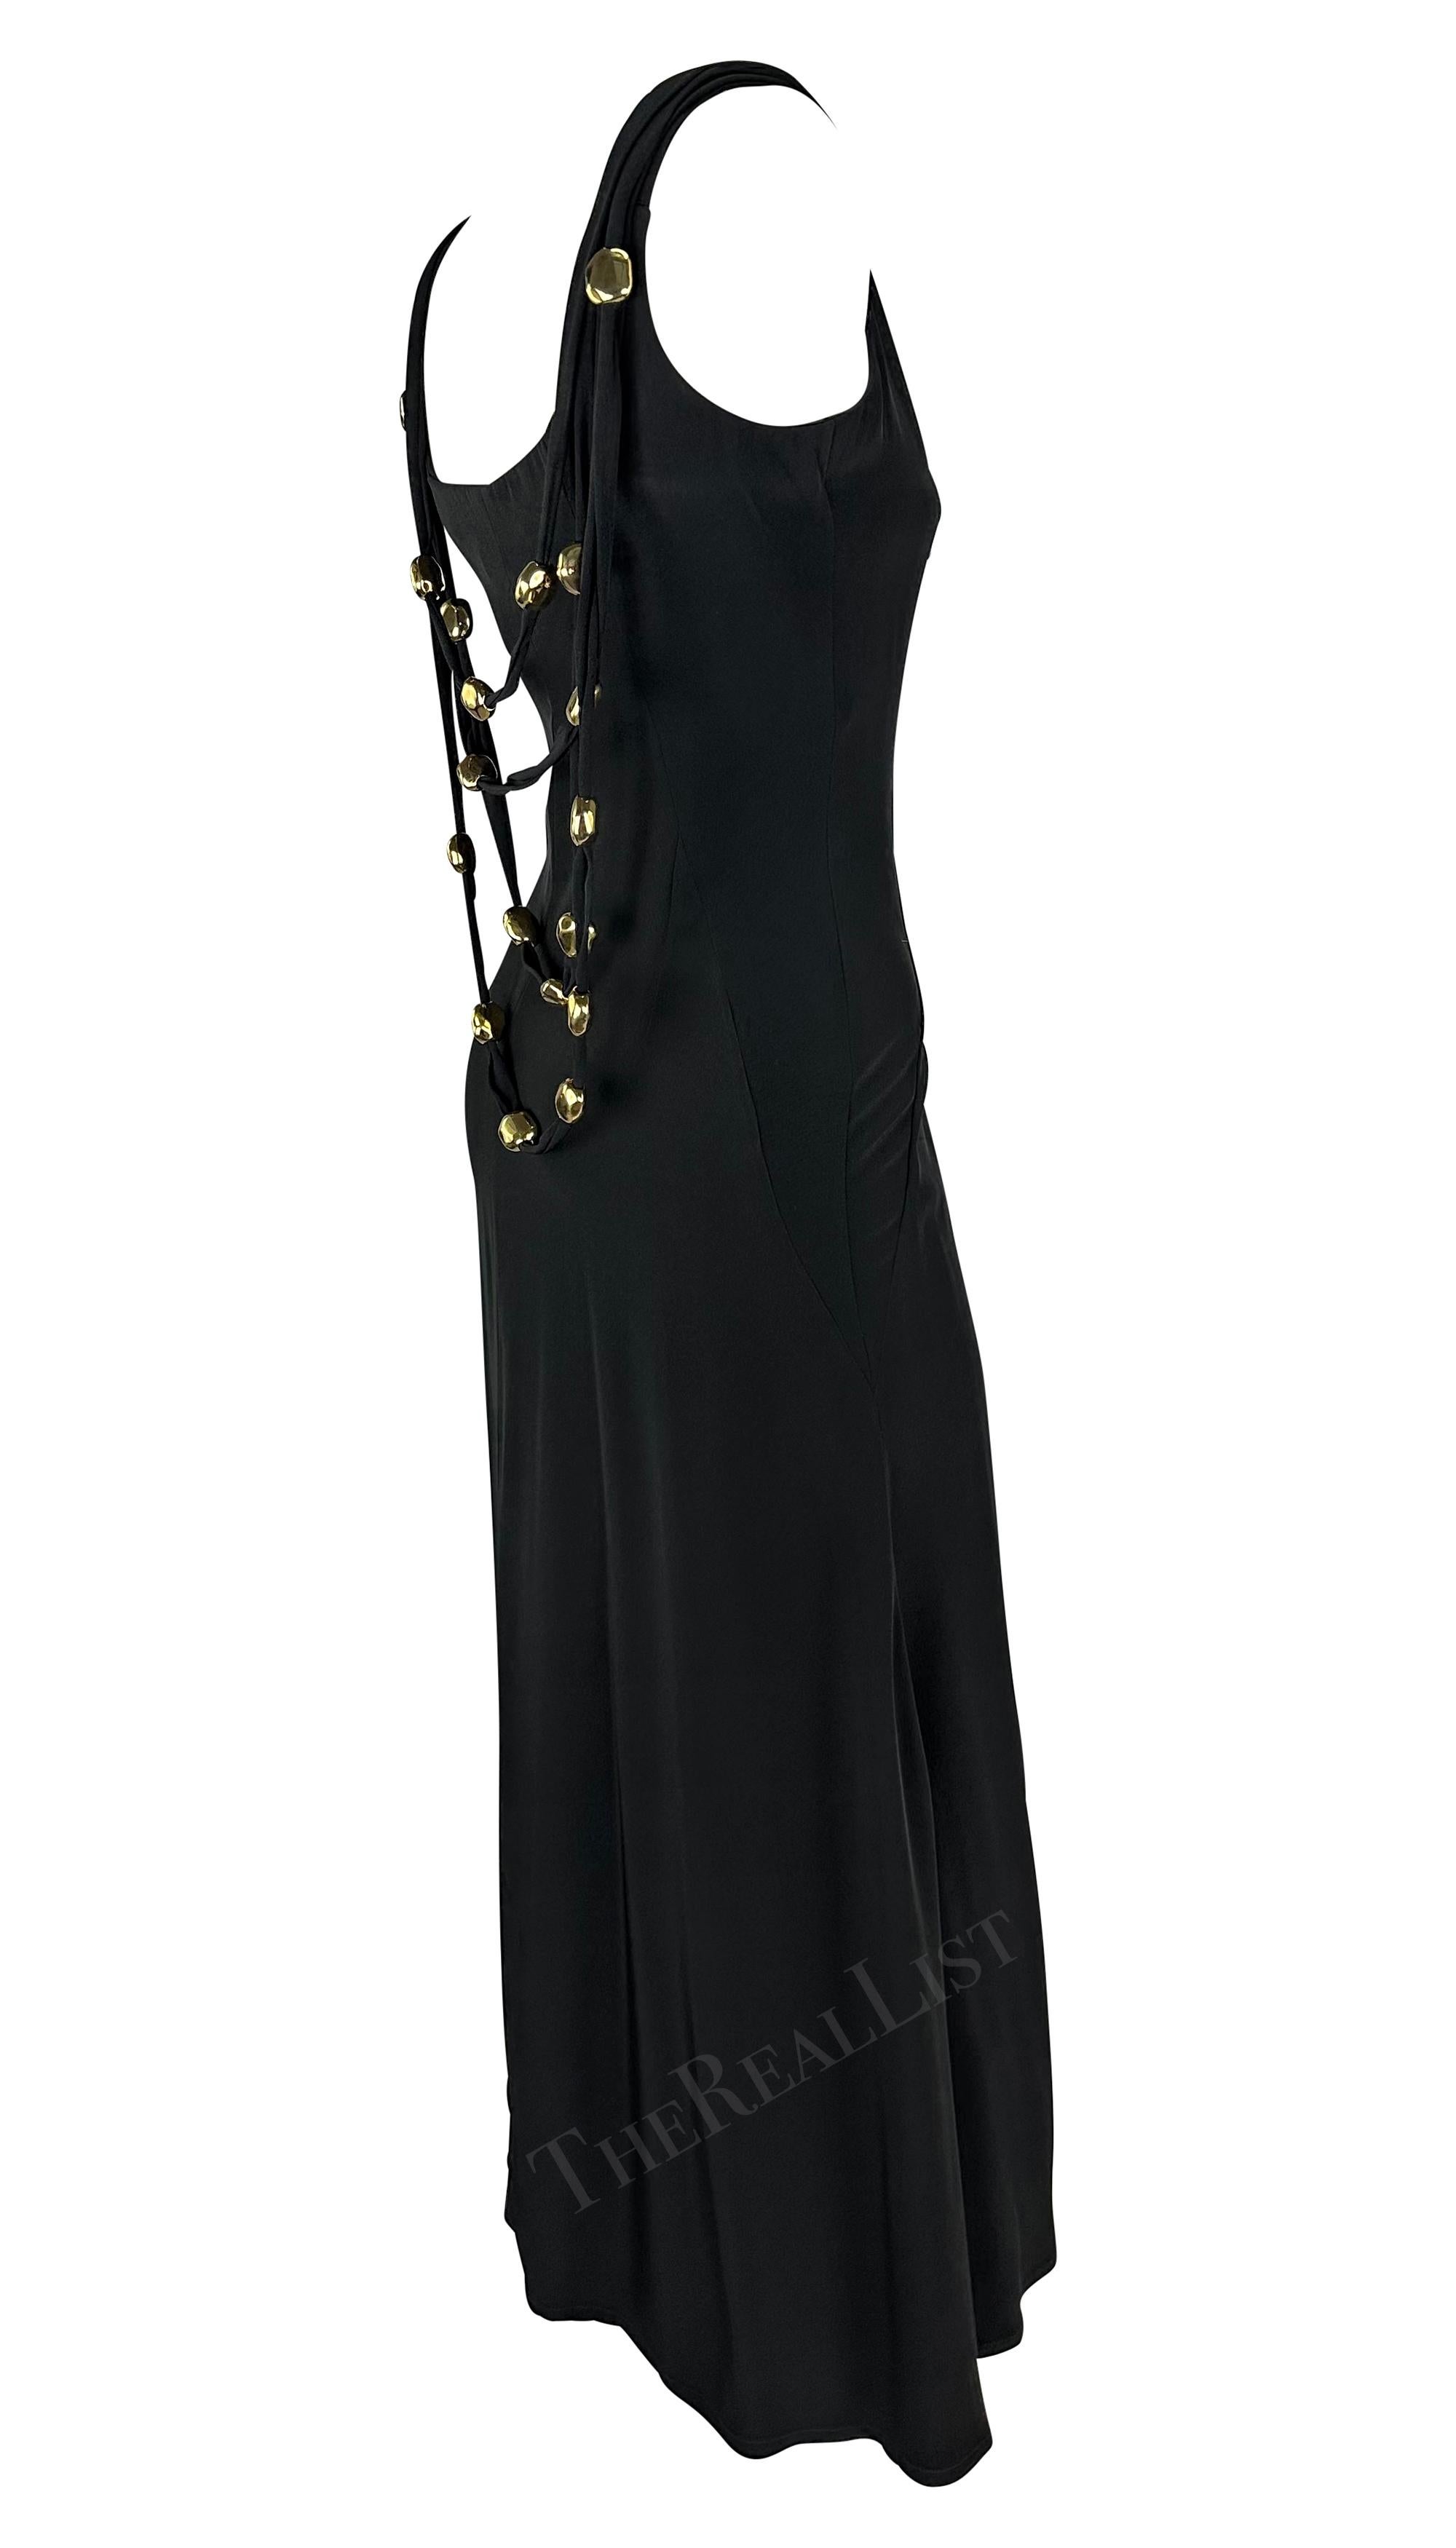 S/S 1993 Christian Lacroix Runway Black Gold Sculptural Jewelry Bead Gown For Sale 7